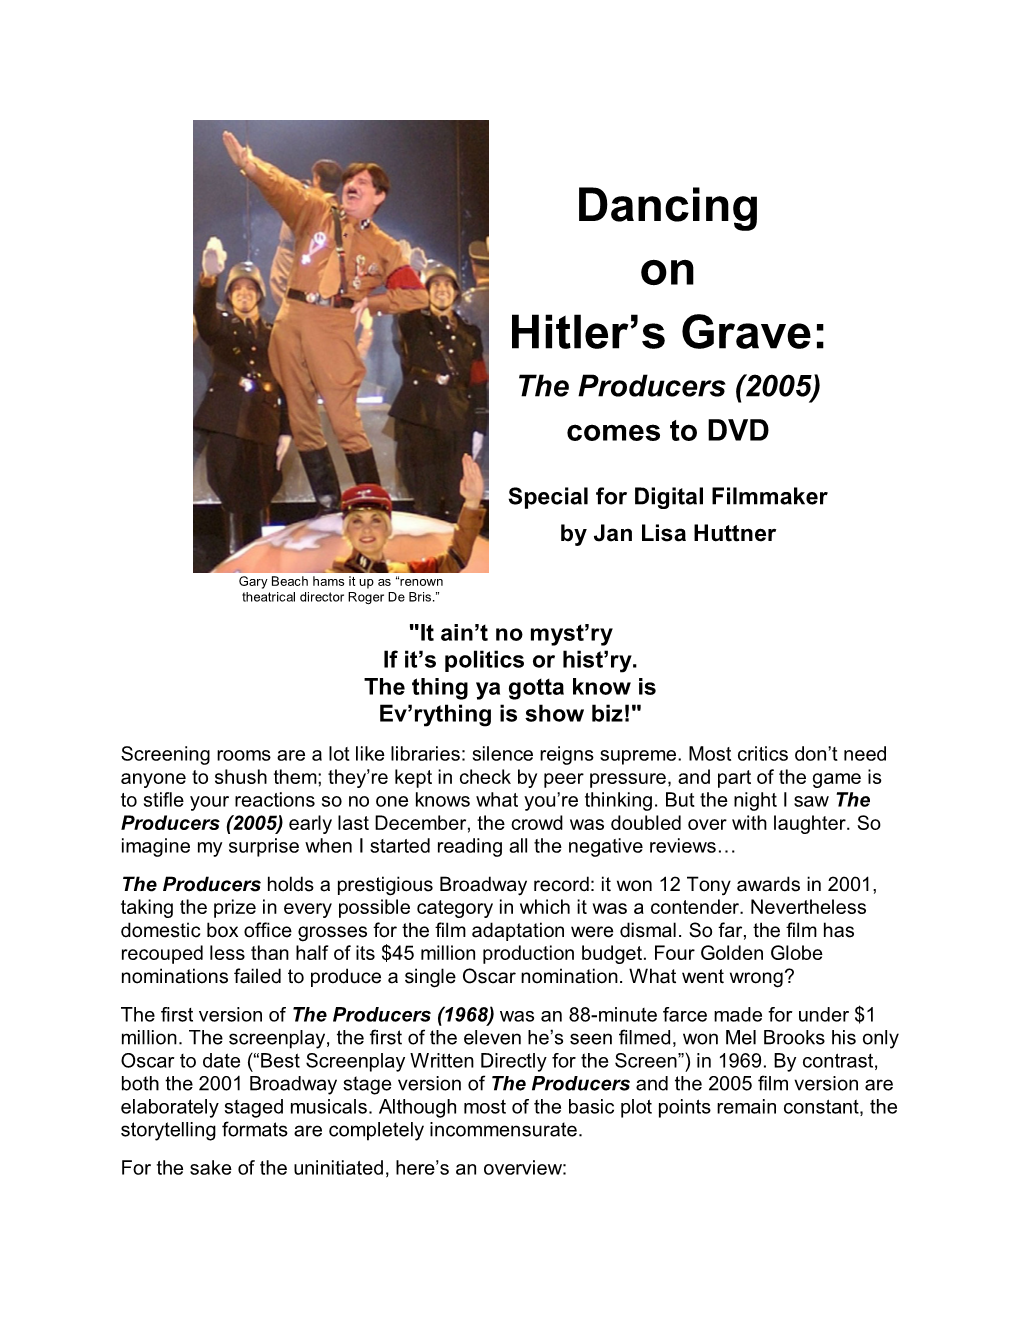 Dancing on Hitler's Grave: the Producers